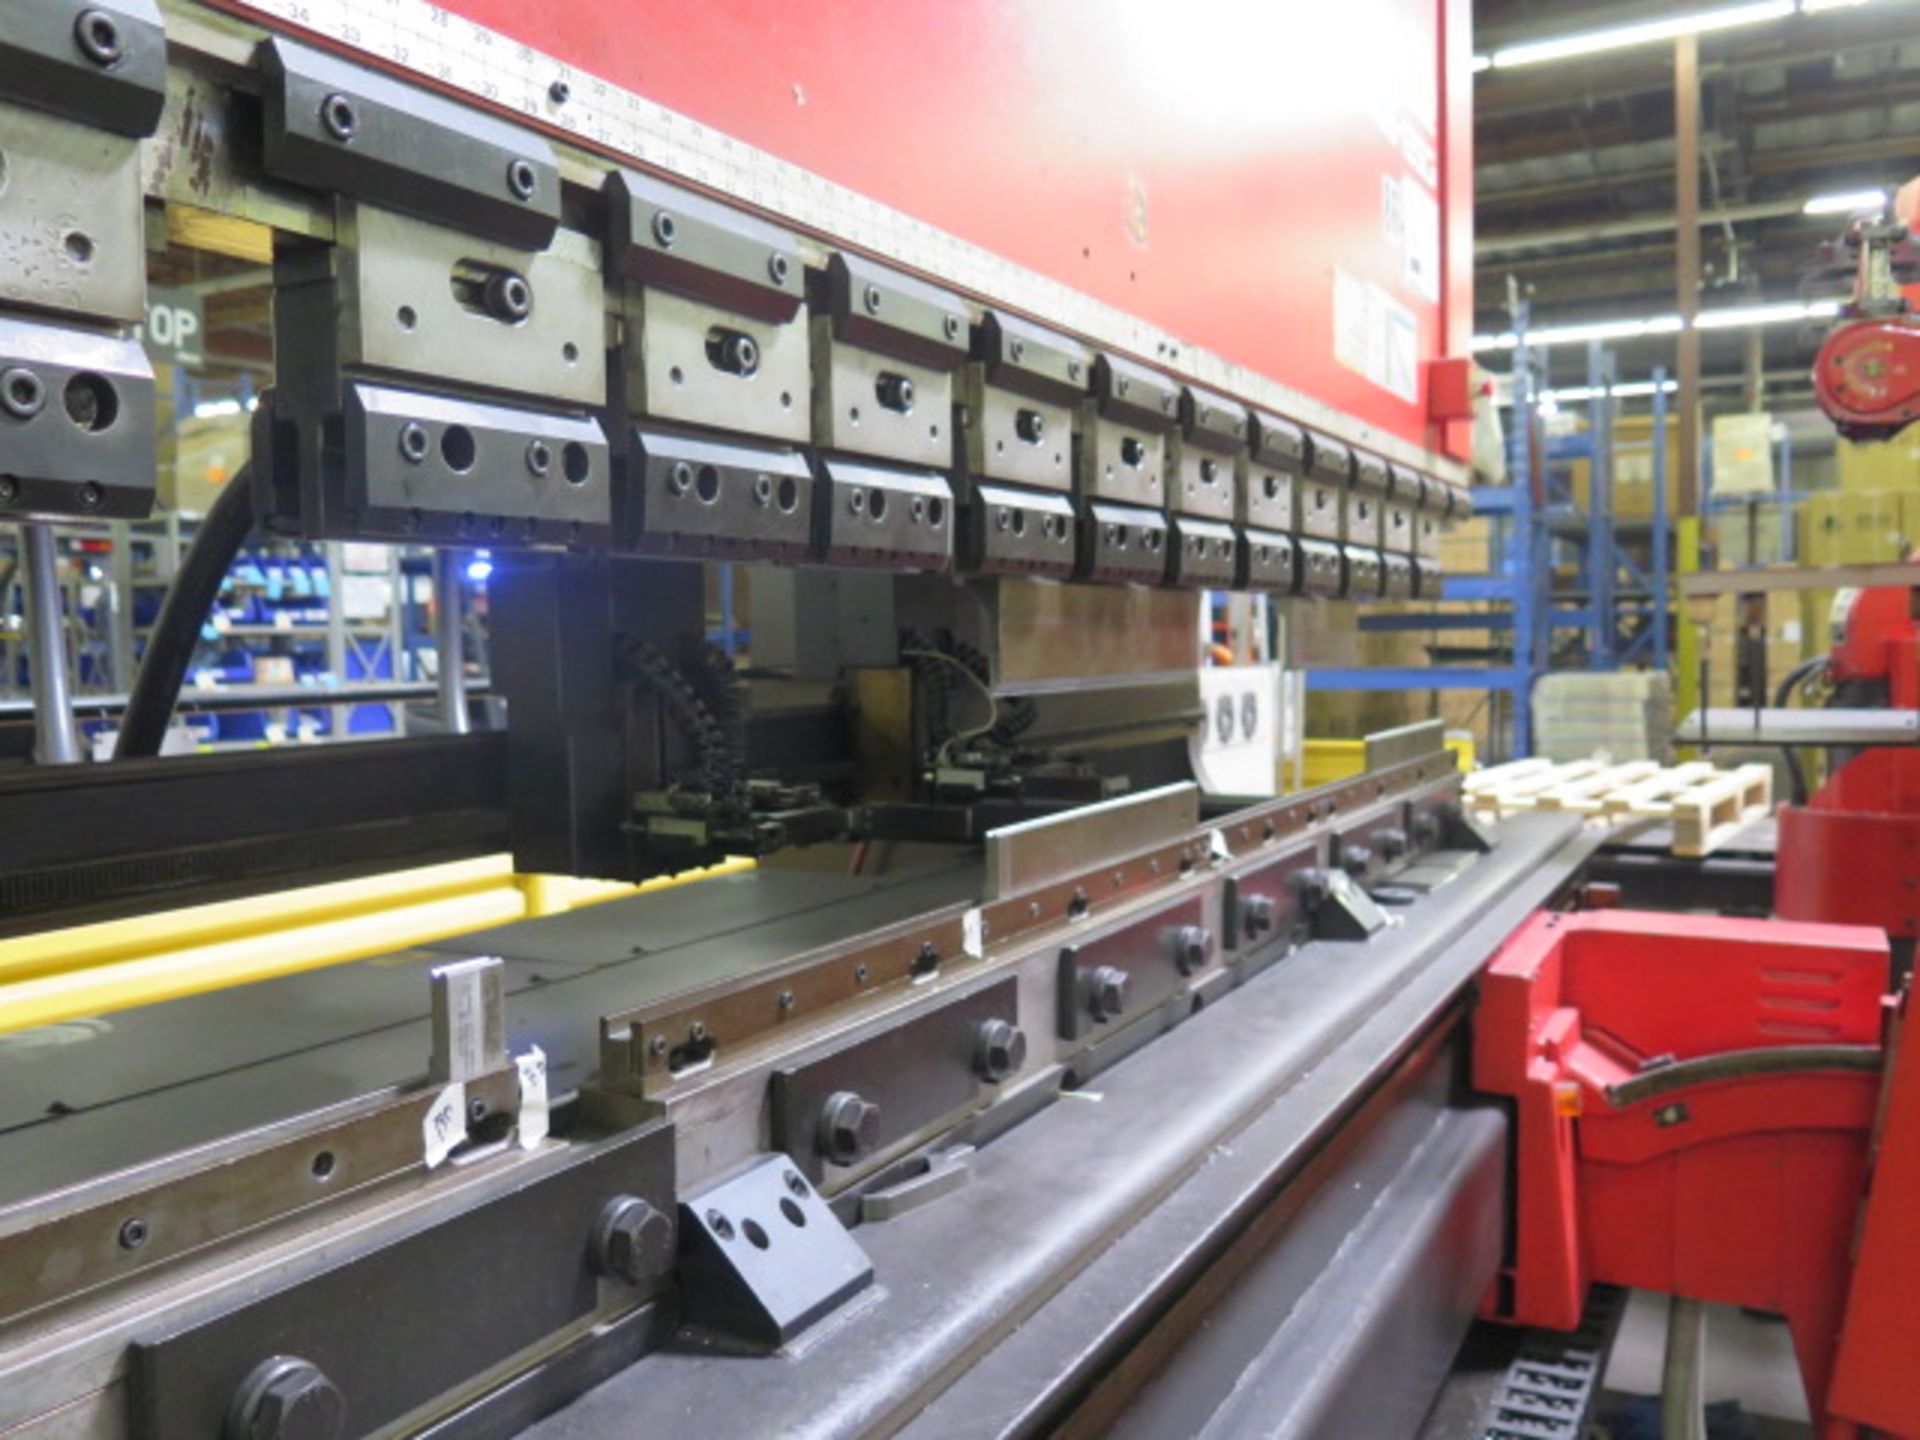 2000 Amada ASTRO-100 mdl.FcxB III-1253 125 Ton x 10' CNC Robotic Bending Cell, SOLD AS IS - Image 8 of 46